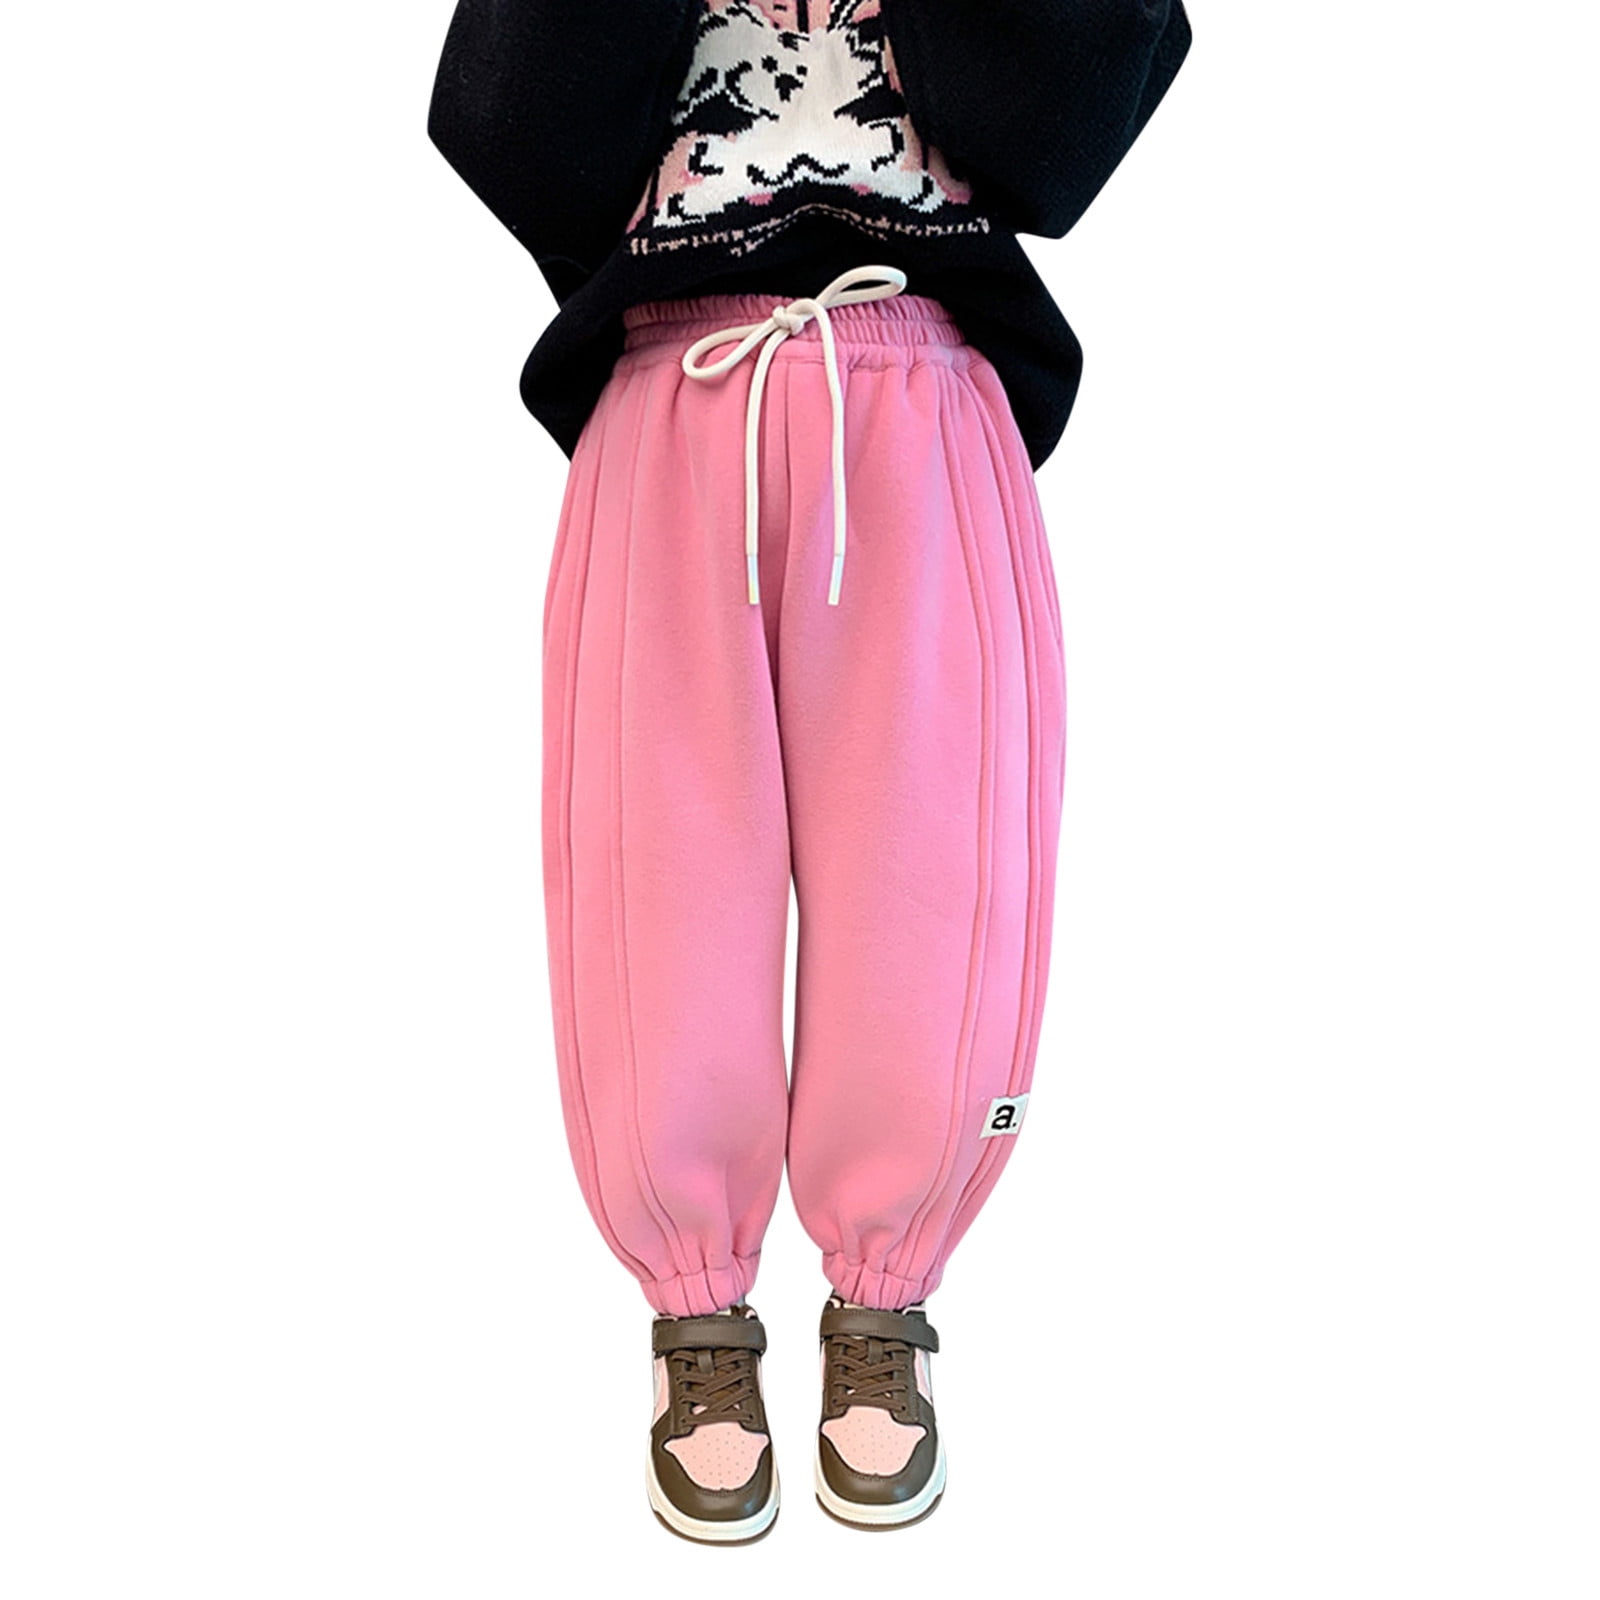  ADJHDFH Sweatpants for Teen Girls High Waisted Sweatpants Dress  Pants Sweatpants Women Baggy Pink Sweatpant Shorts Women Plus Size Yoga  Pants with Pockets 10 Dollars and Under Items Under Clothes 